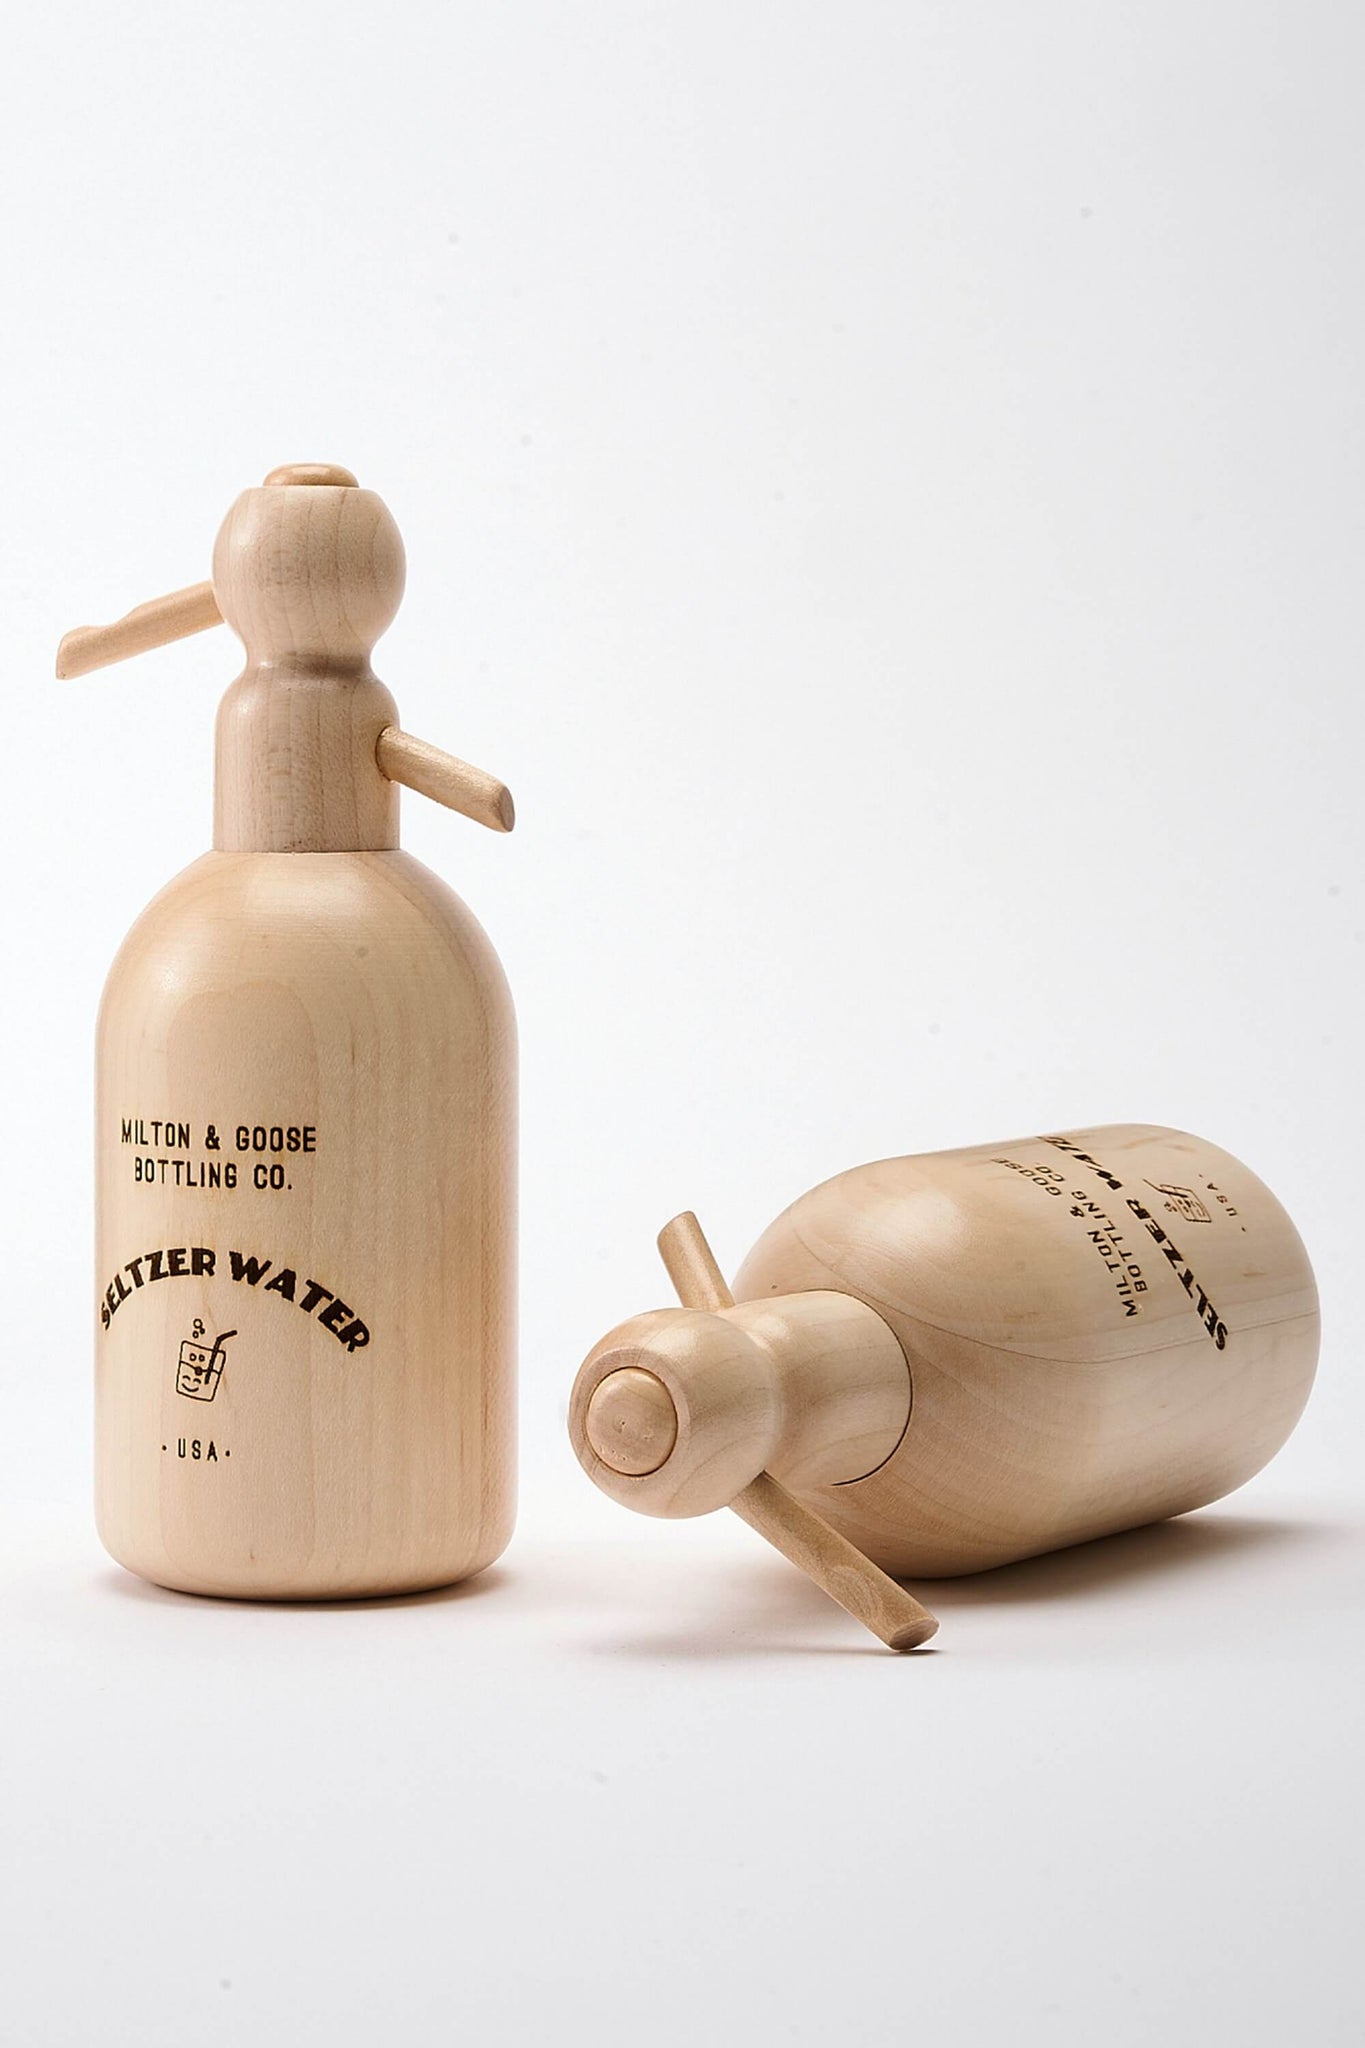 Two wooden Seltzer Bottle Toys. One is standing and one is laying on its side.